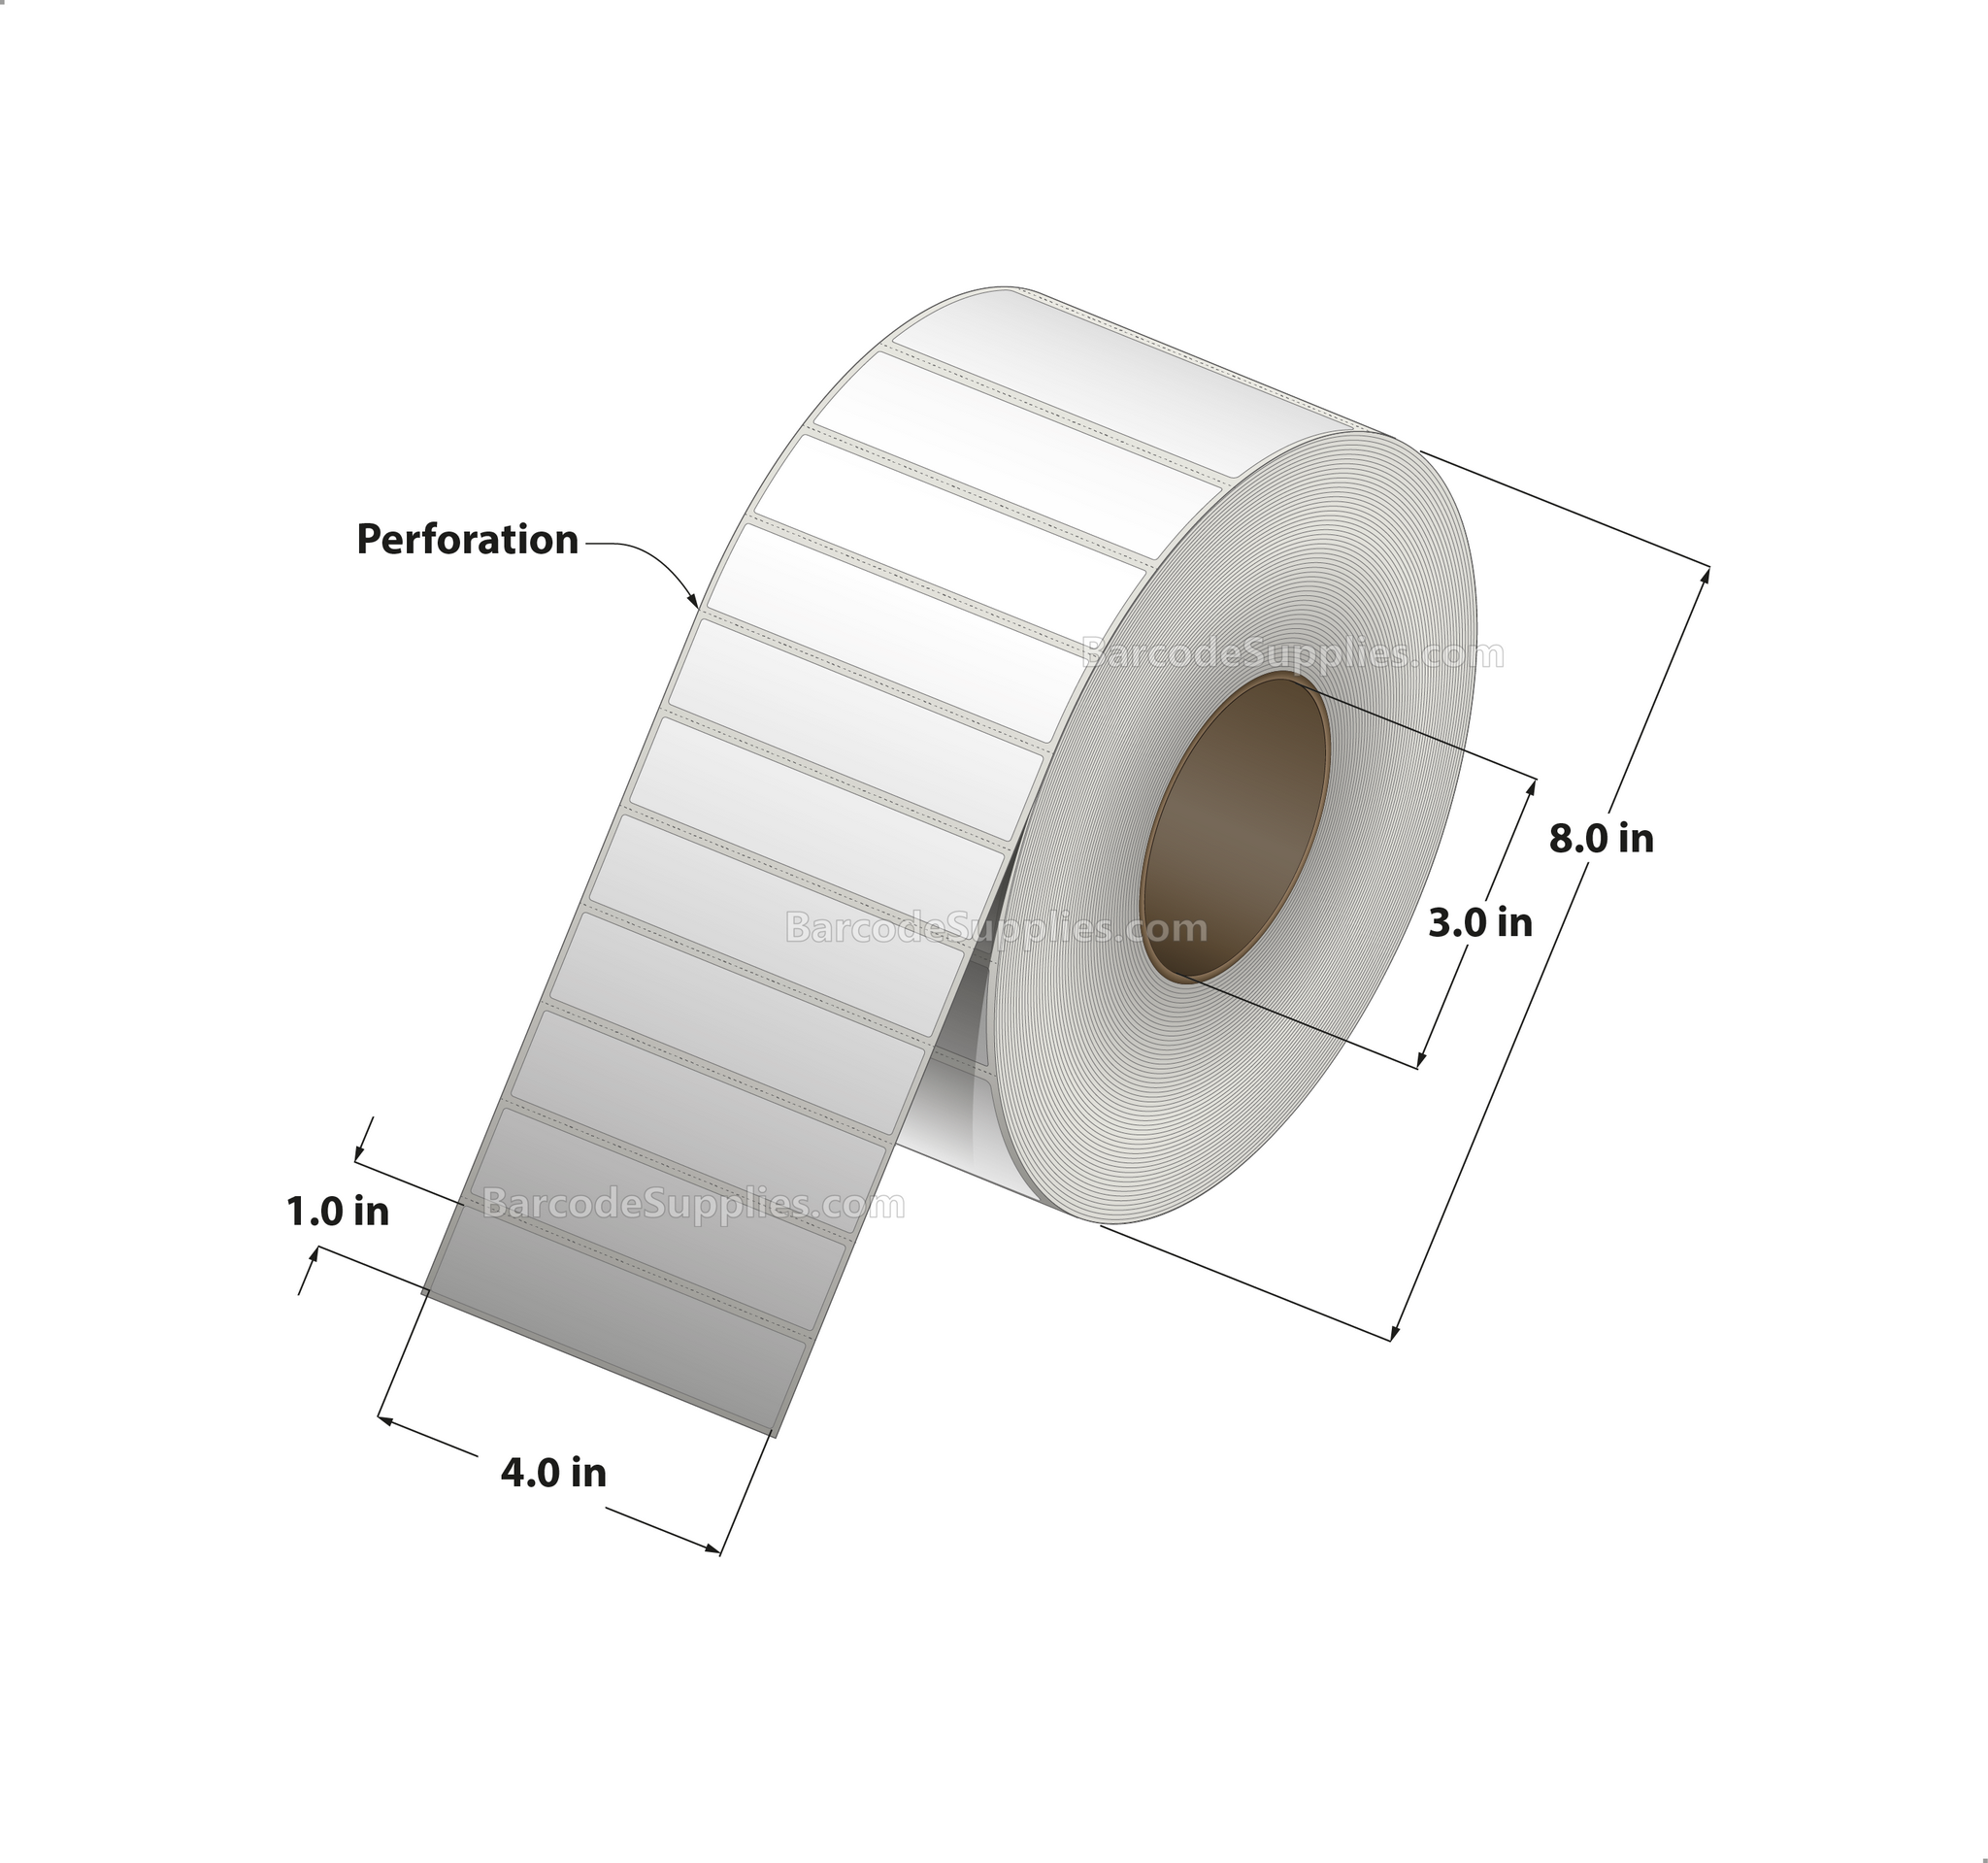 4 x 1 Thermal Transfer White Labels With Permanent Adhesive - Perforated - 5000 Labels Per Roll - Carton Of 4 Rolls - 20000 Labels Total - MPN: RP-4-1-5000-3